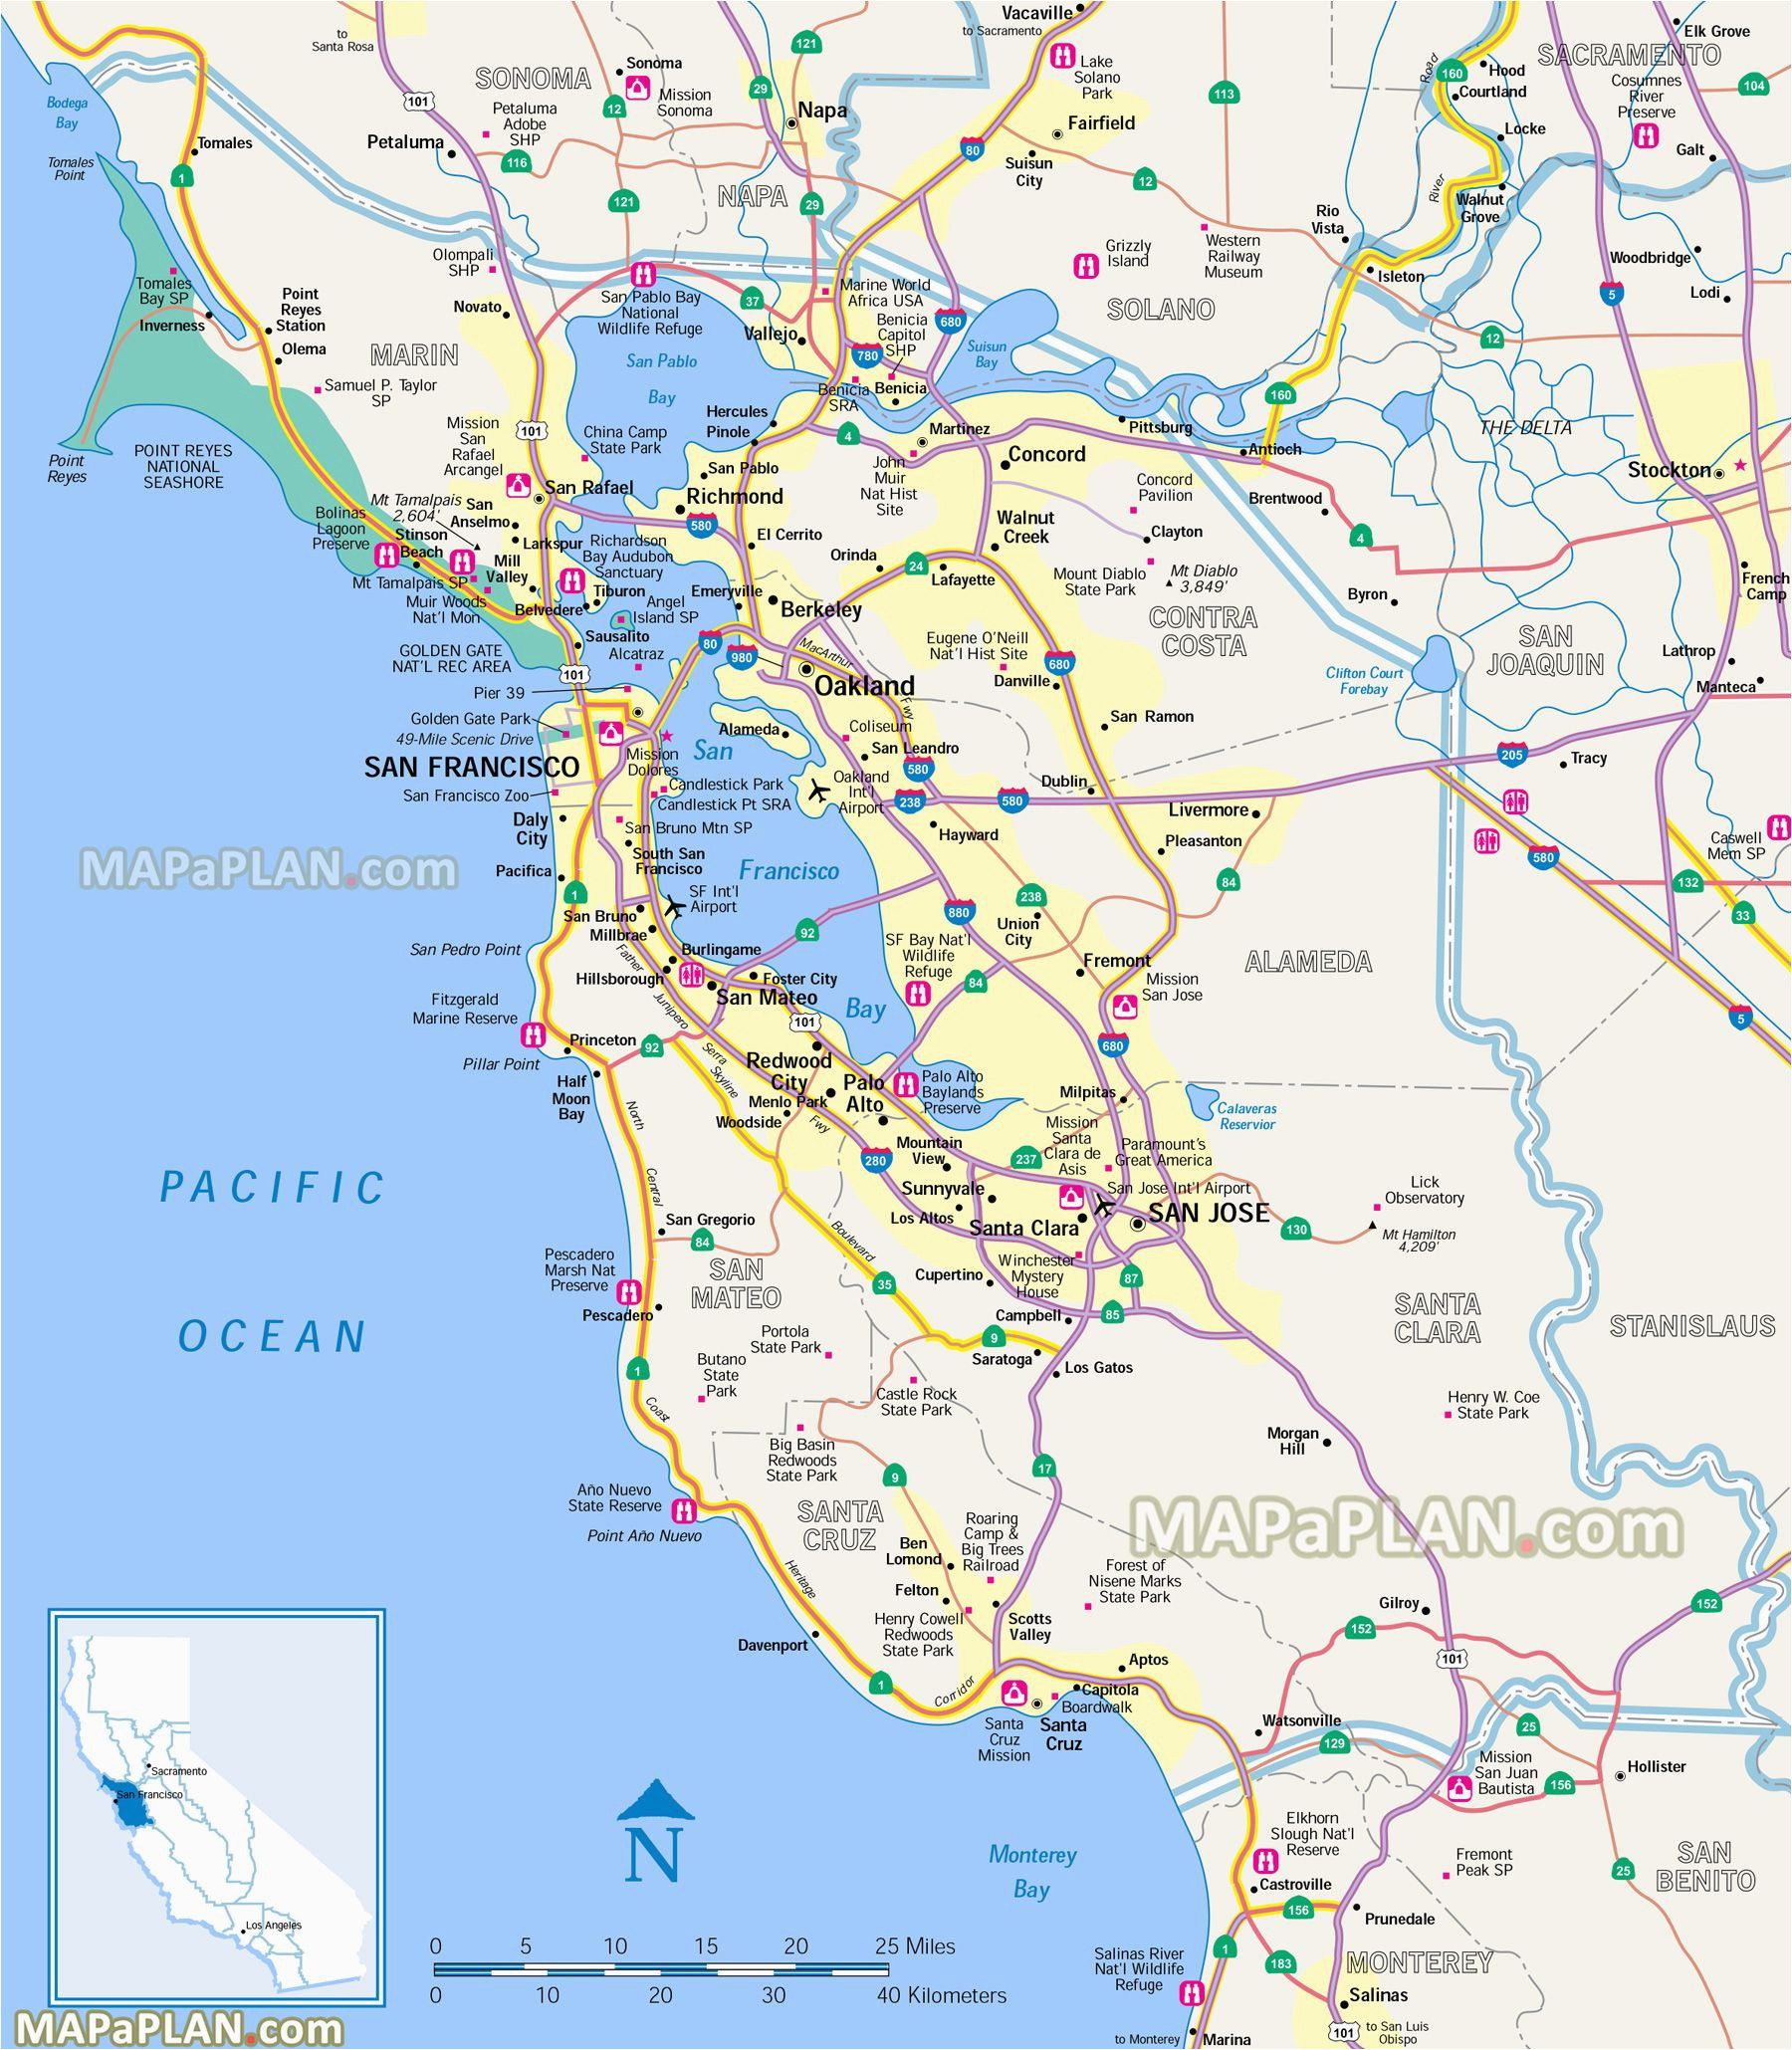 camping northern california map reference download wallpaper high